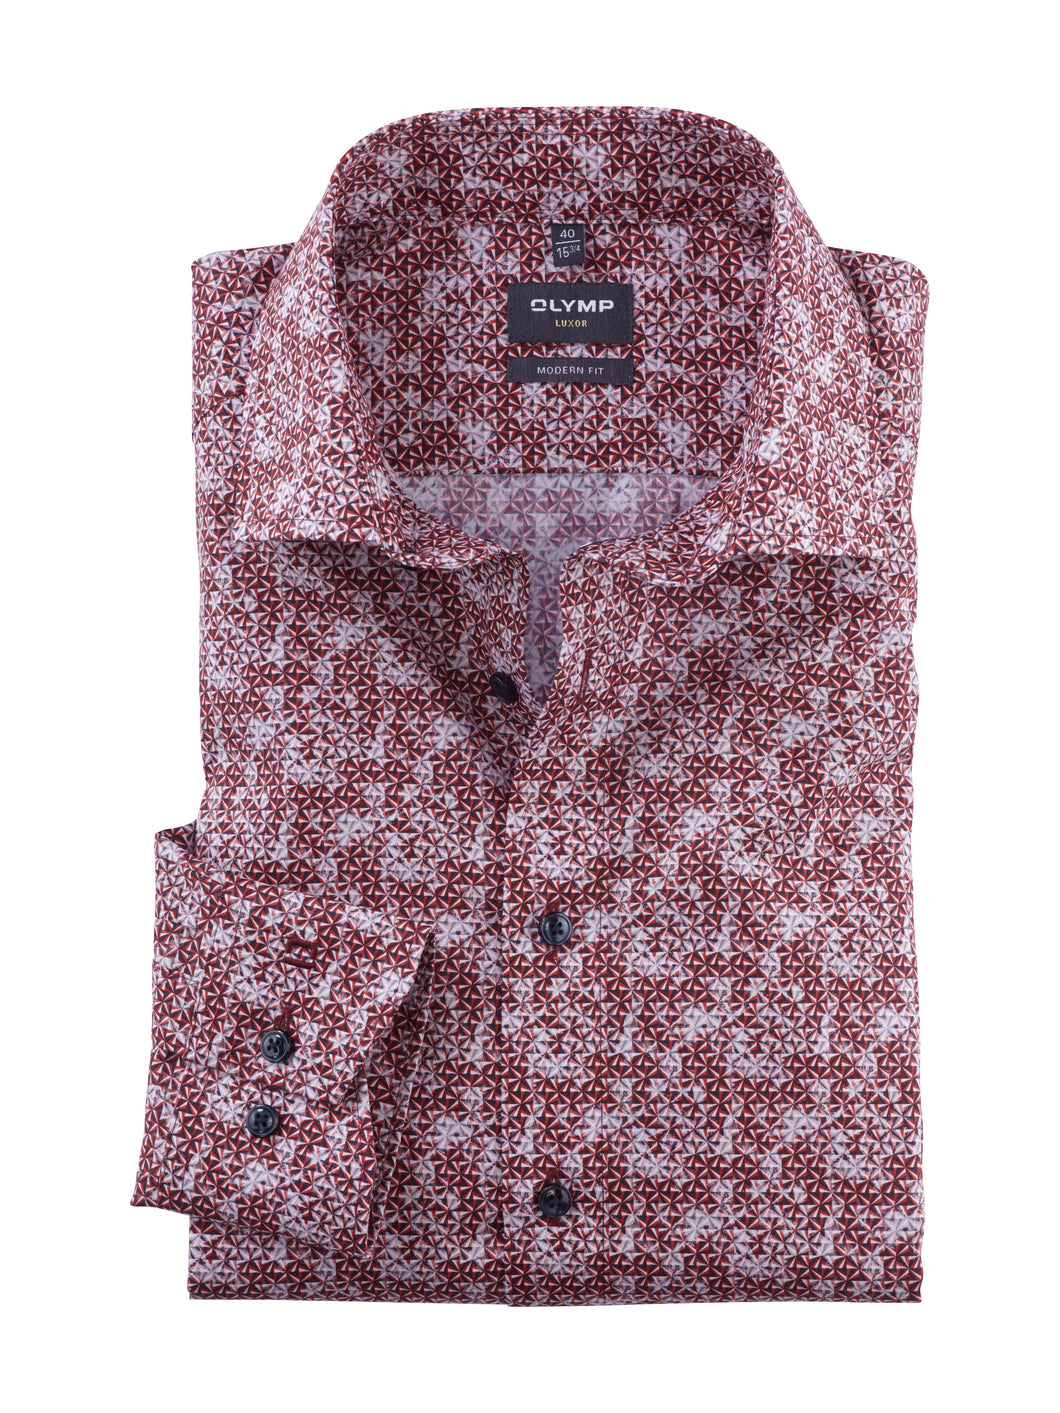 New Olymp red graphic print long sleeve shirt